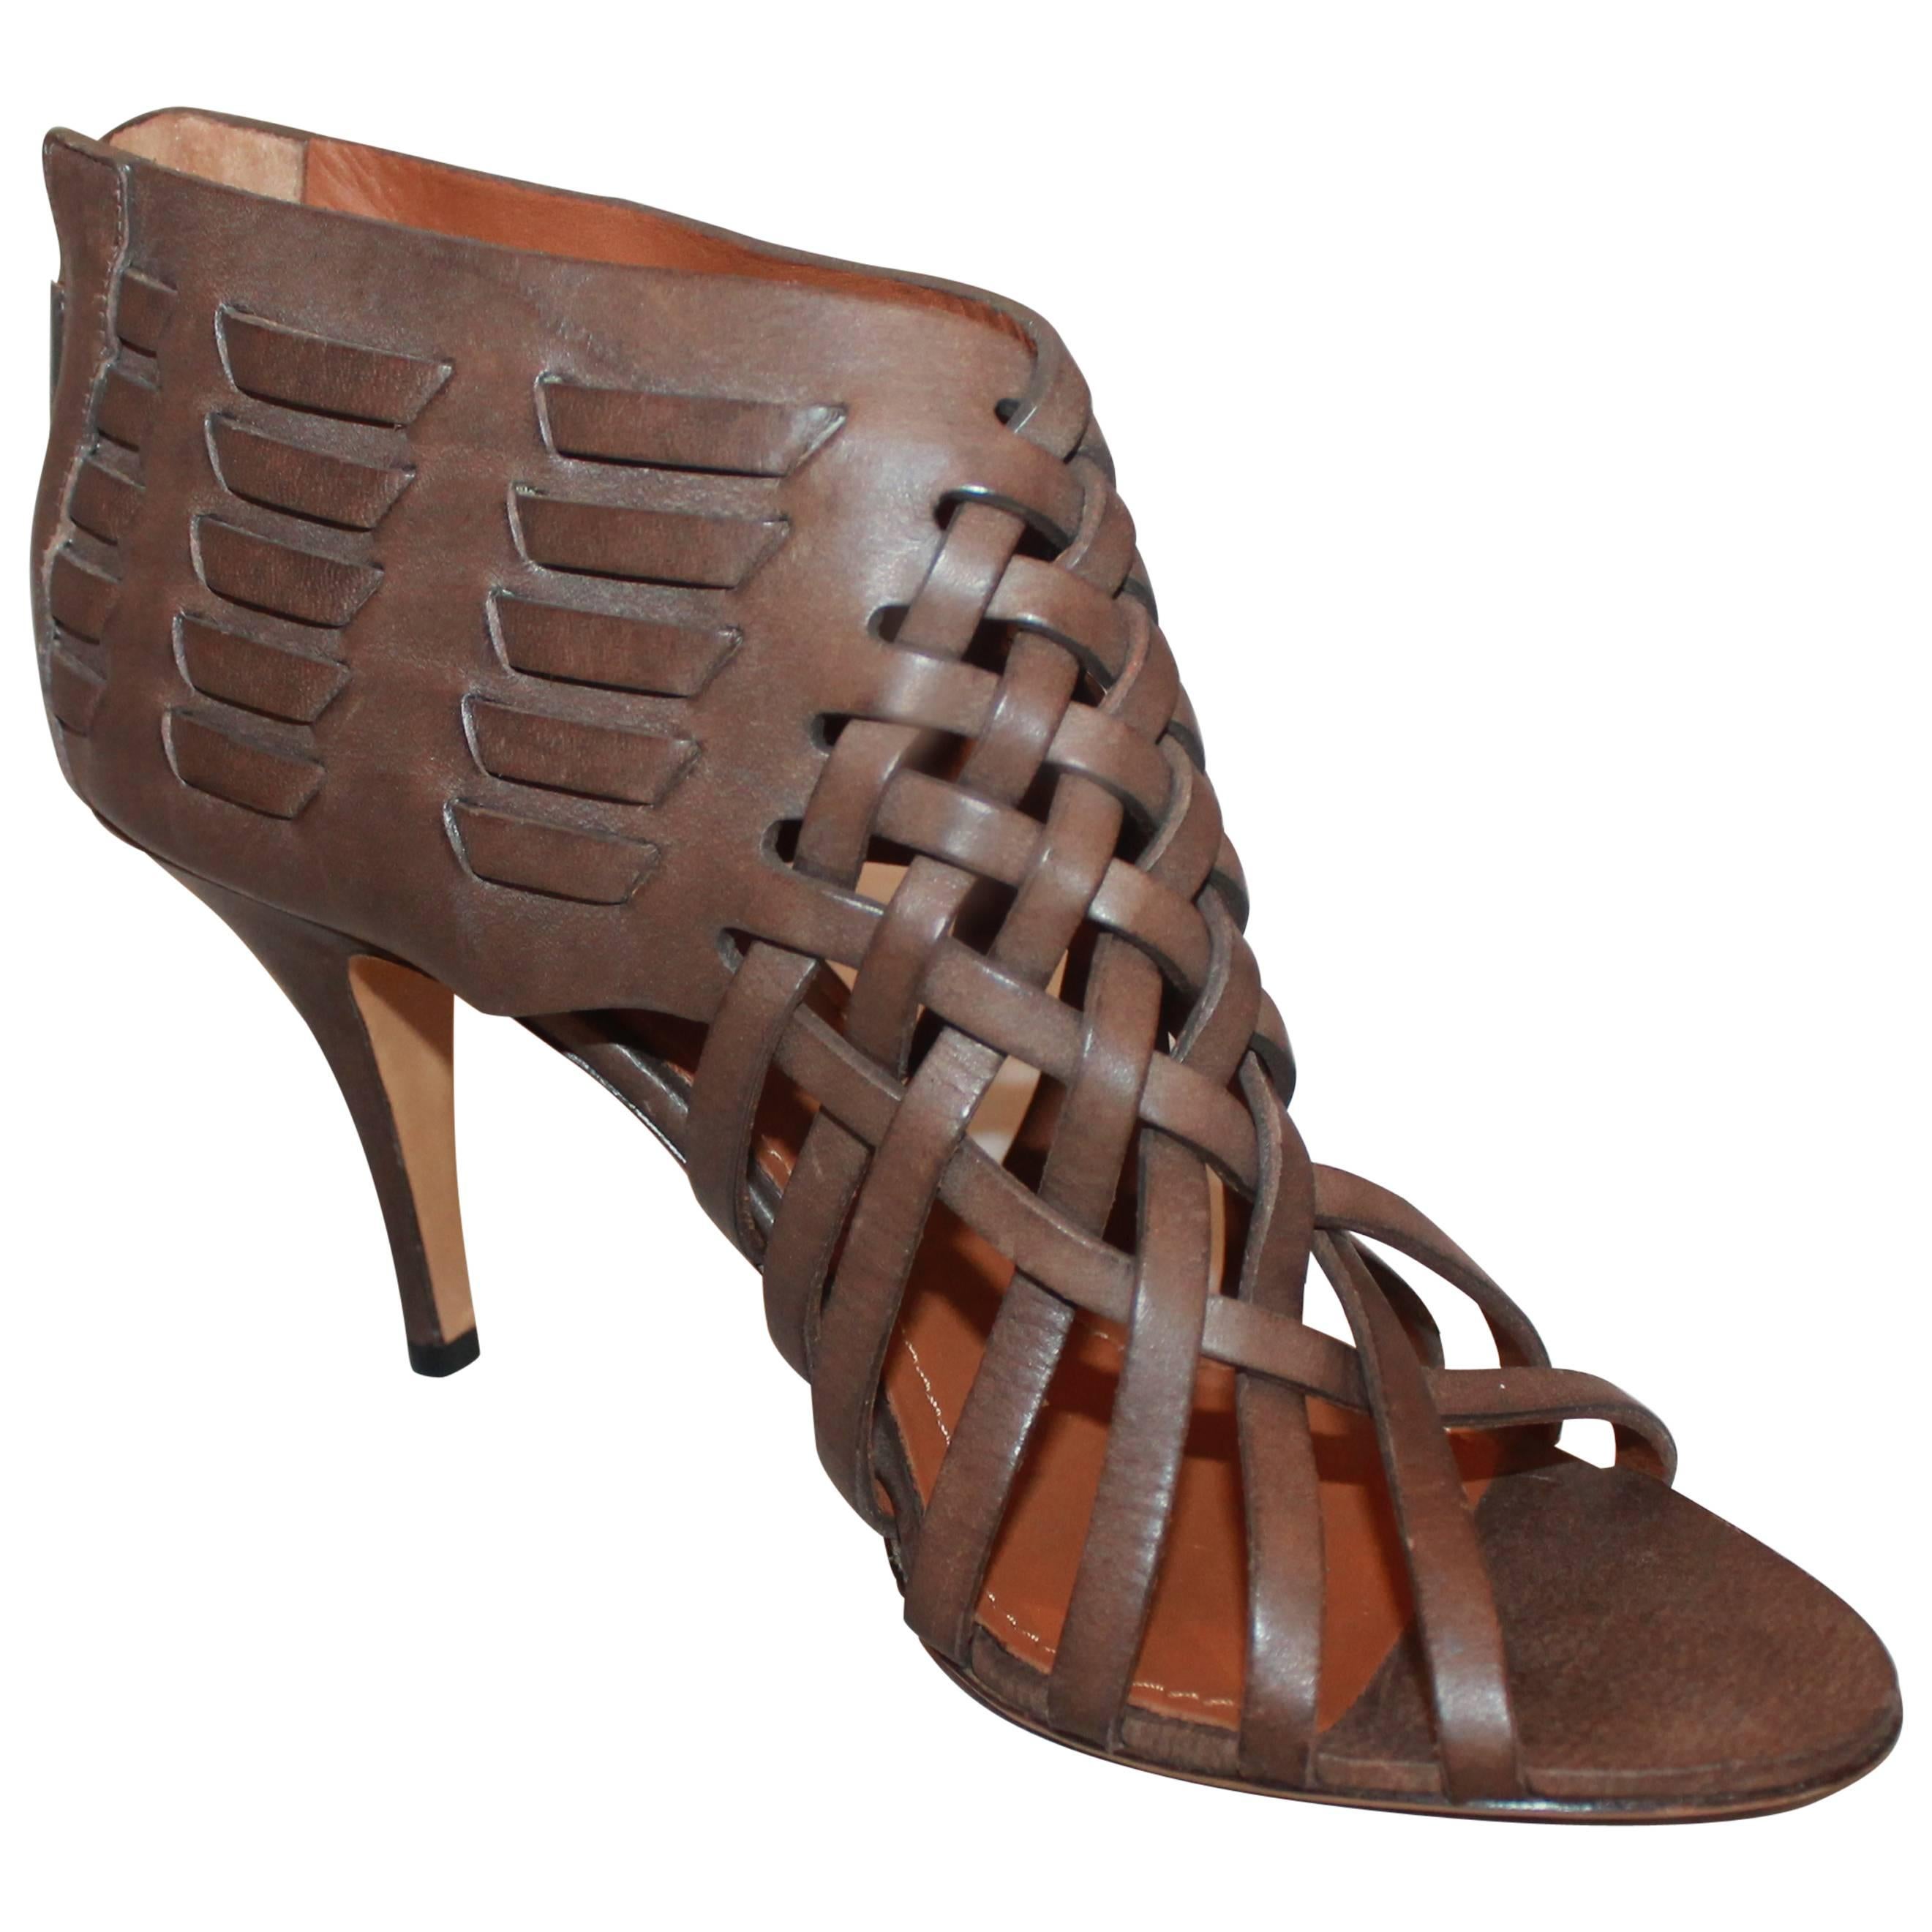 Givenchy Brown Woven Leather Sandal Bootie with Back Zipper - 40